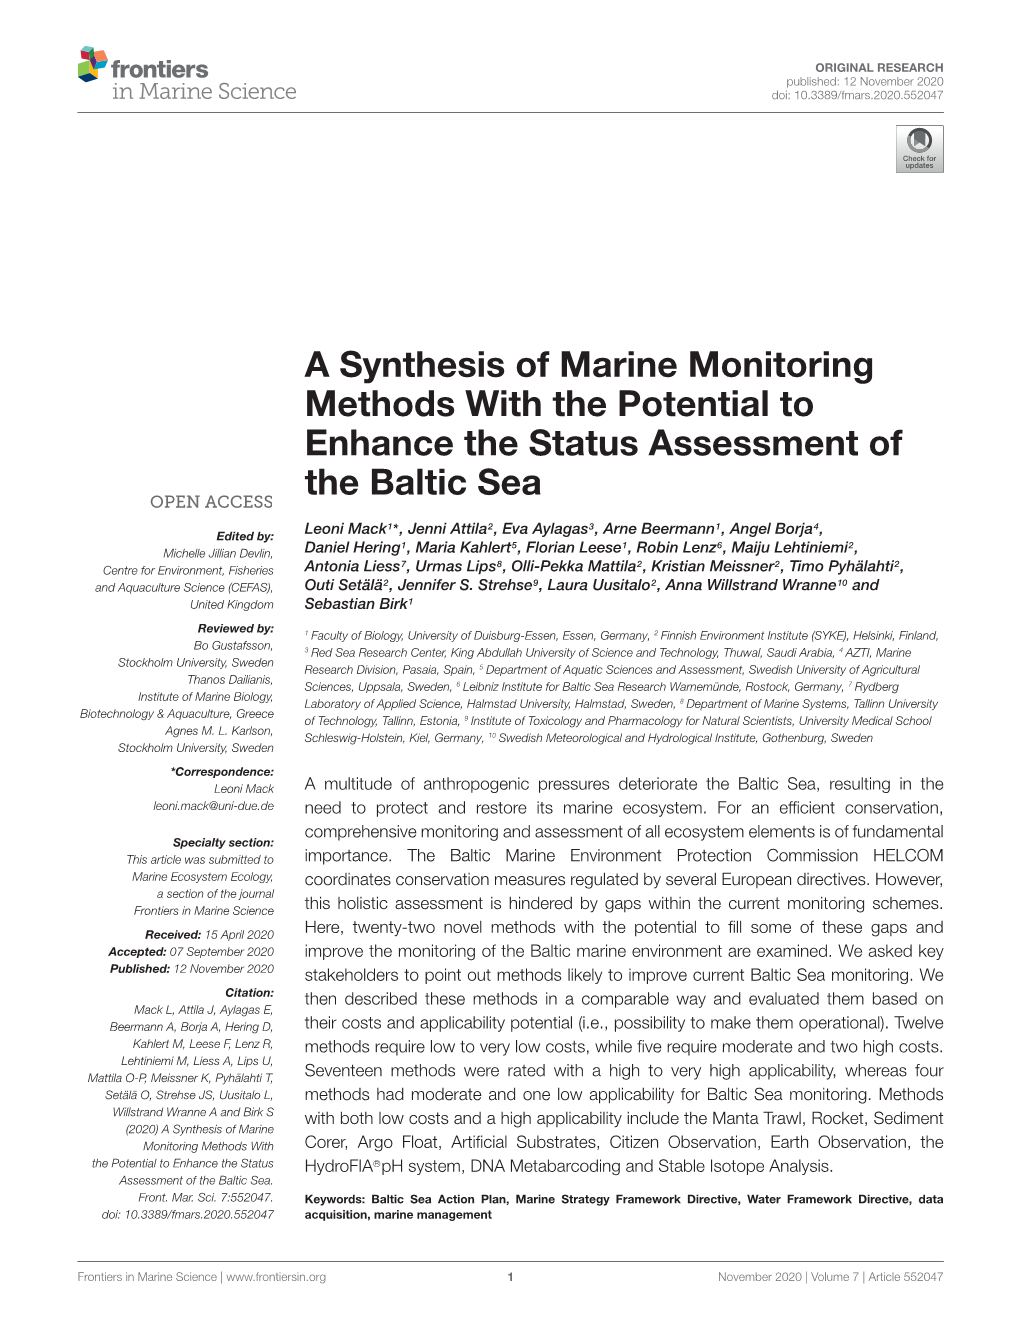 A Synthesis of Marine Monitoring Methods with the Potential to Enhance the Status Assessment of the Baltic Sea